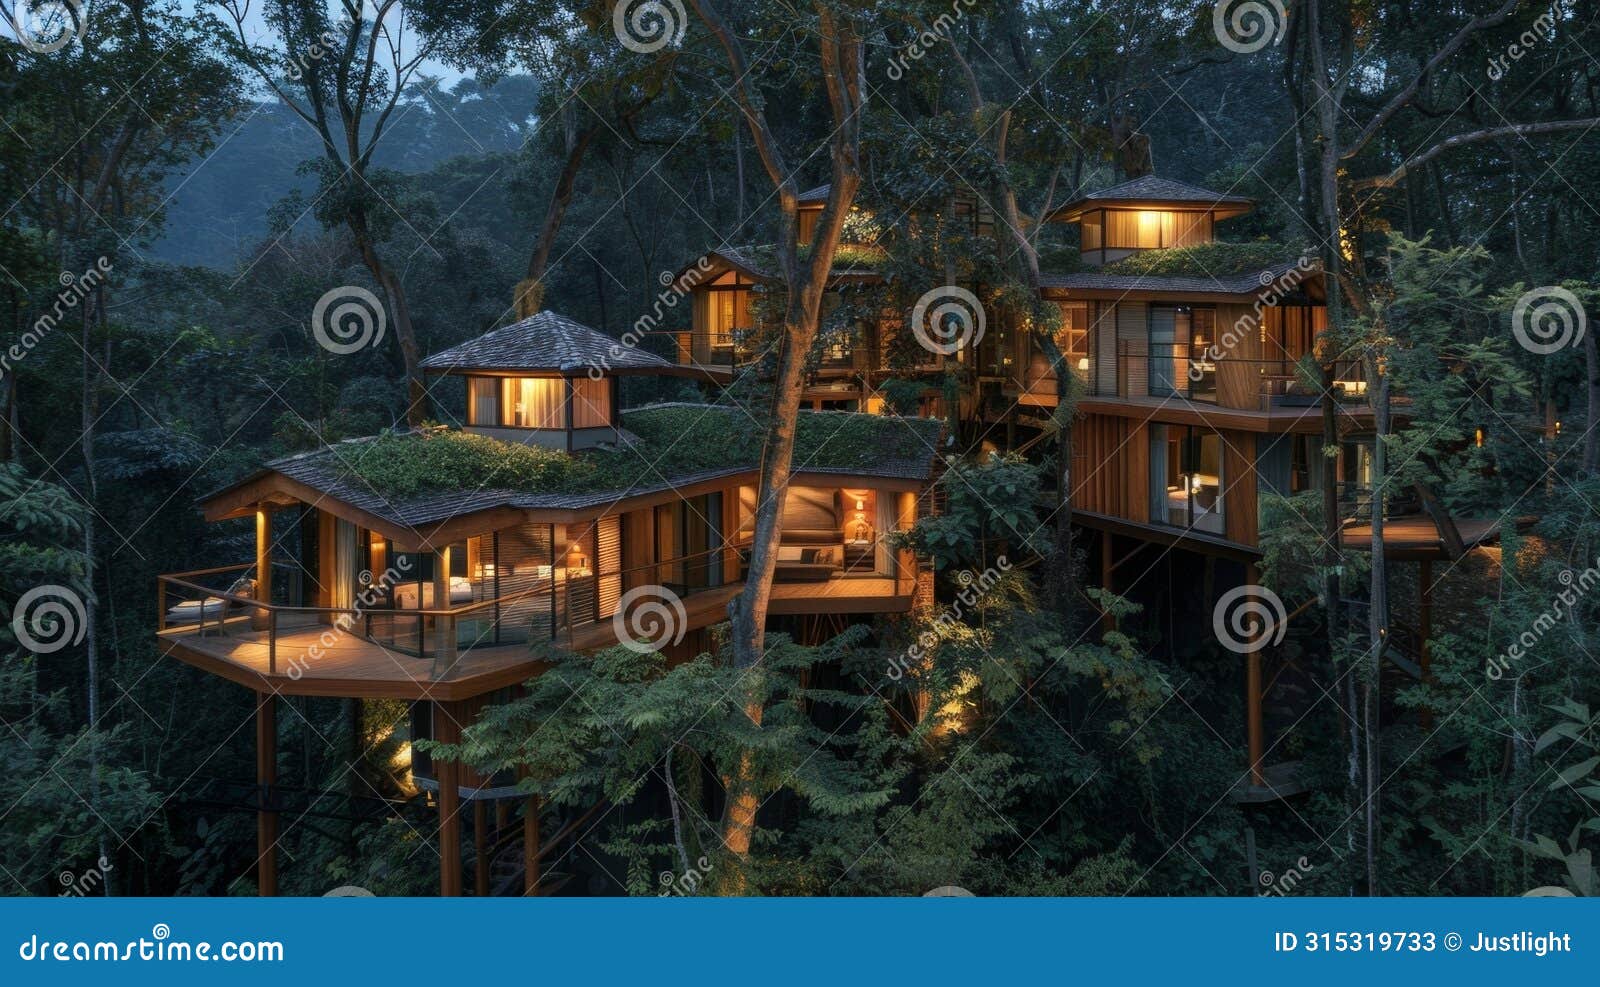 a series of cozy and luxurious treehouse suites perched high in the treetops offering a tranquil and comfortable sleep a